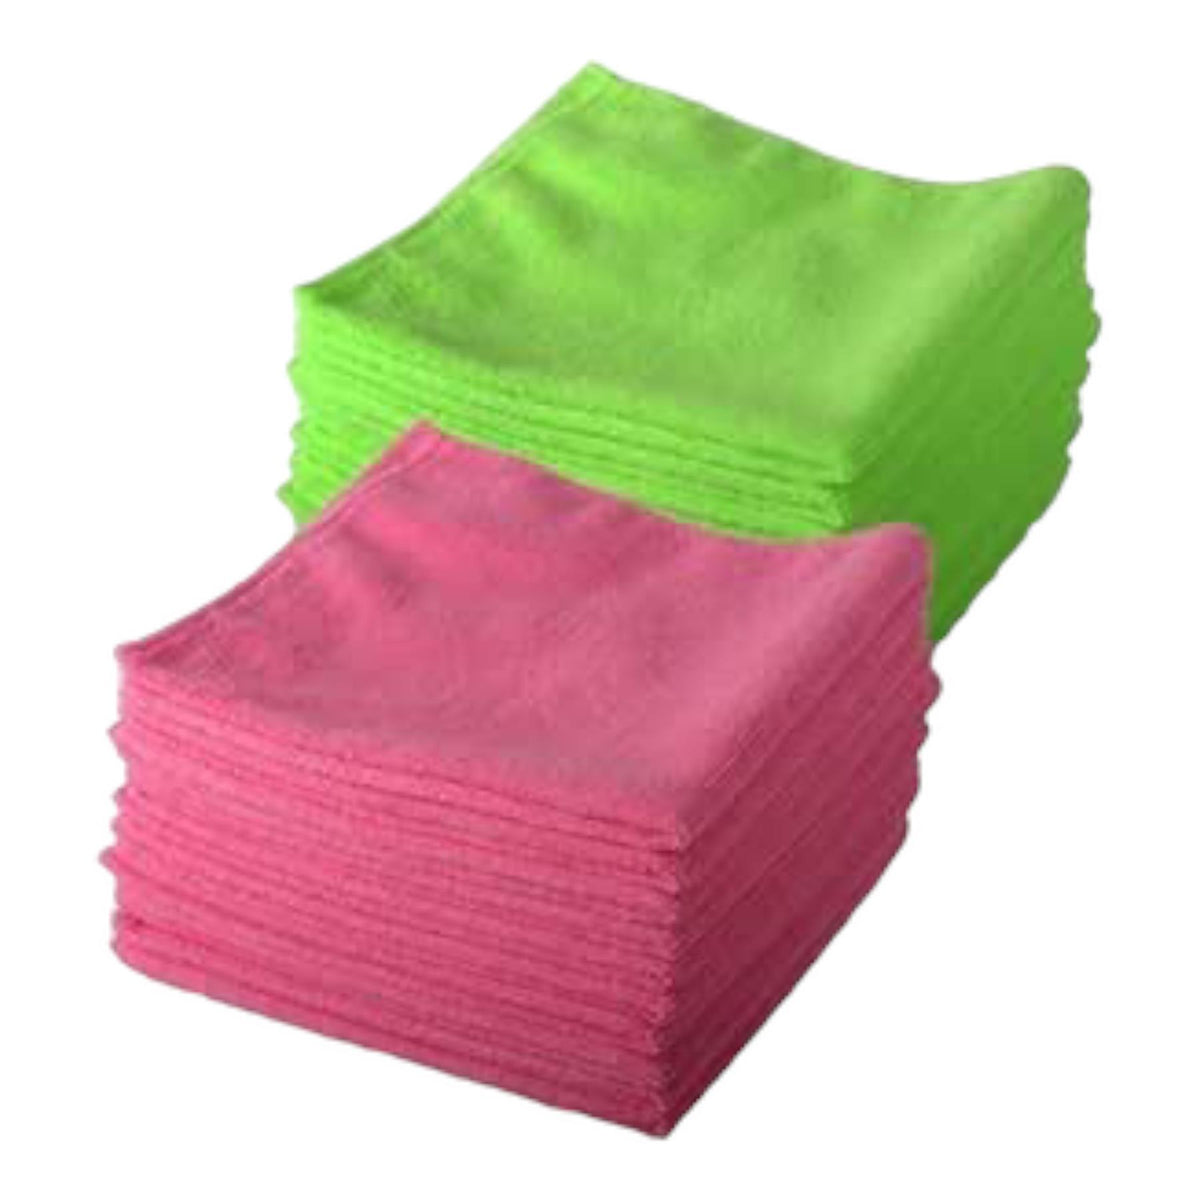 10 Pink and 10 Green Exel Microfibre cloths, Lint Free, For Polishing, Washing, Waxing And Dusting